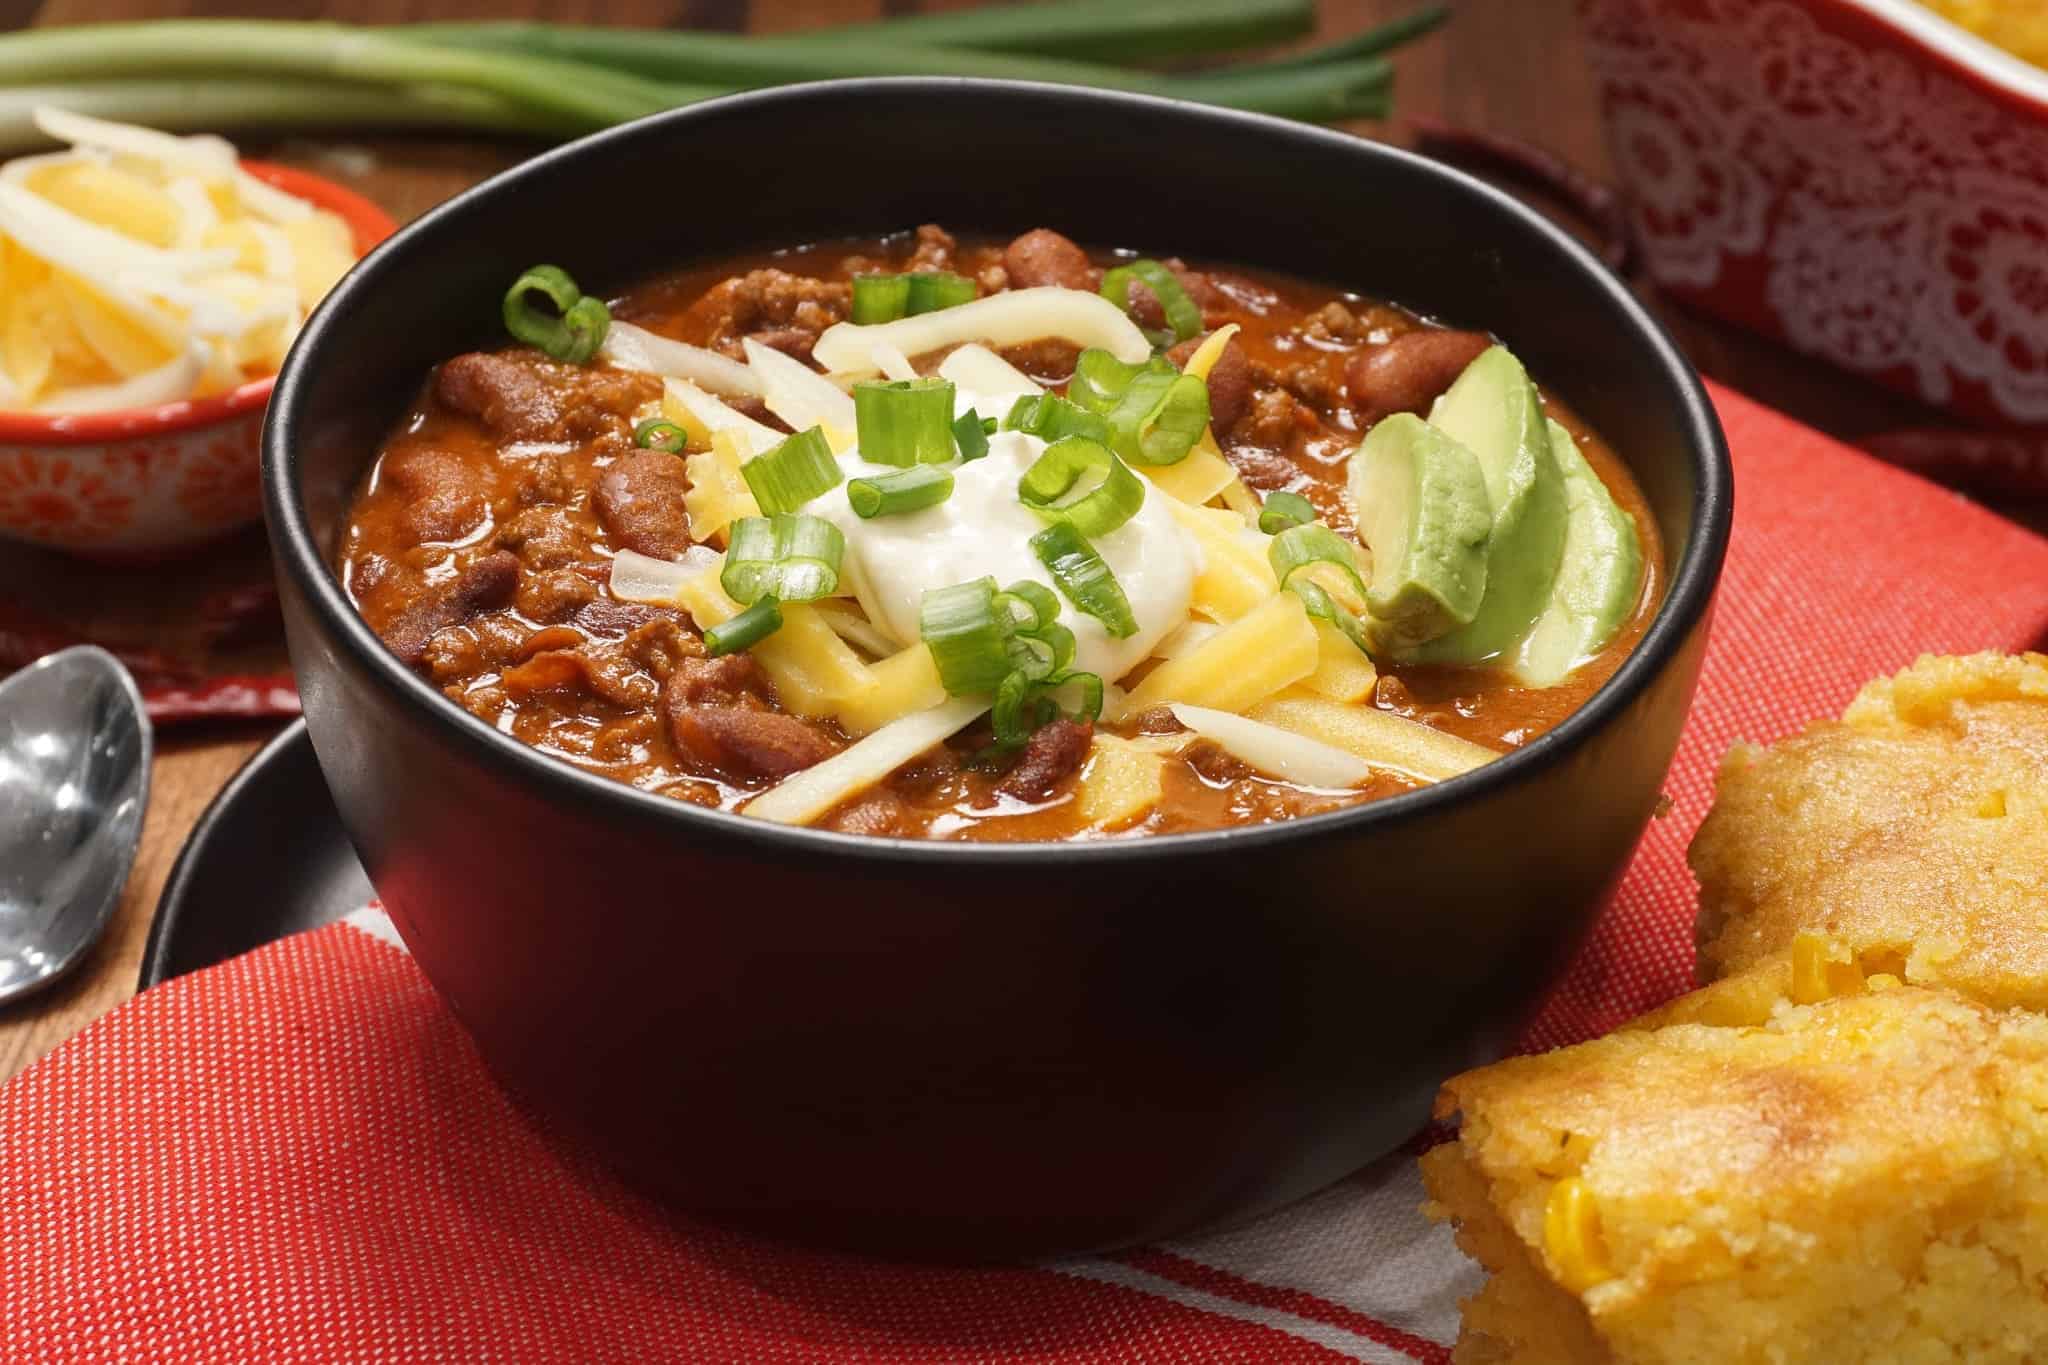 How To Cook Chili With Dry Beans - Recipes.net